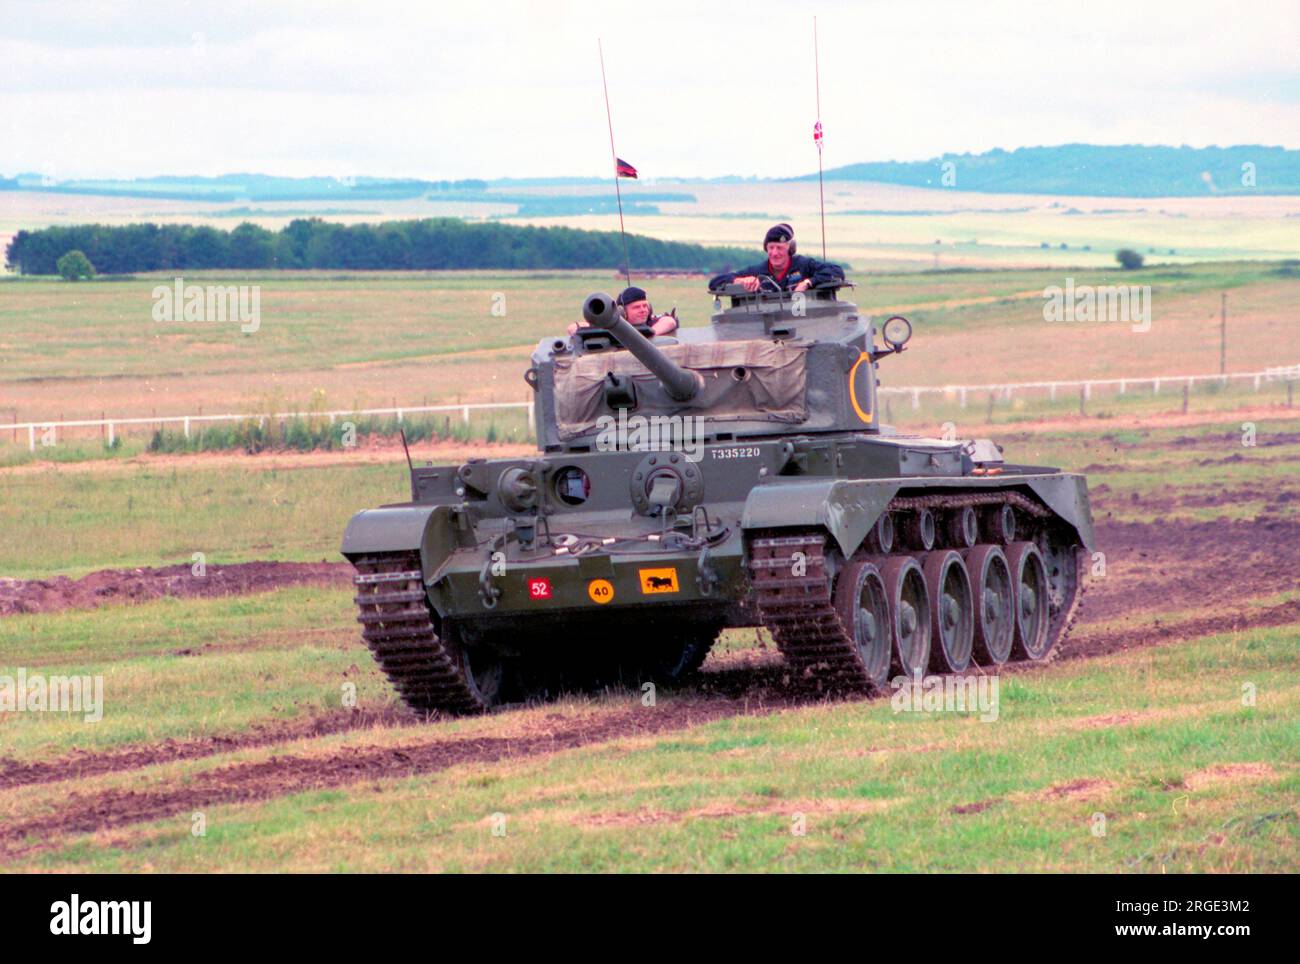 A Comet tank, (Tank, Cruiser, Comet I (A34)), at the 2006 Larkhill Royal Artillery open day,on the Larkhill racecourse / exhibition ground. Stock Photo